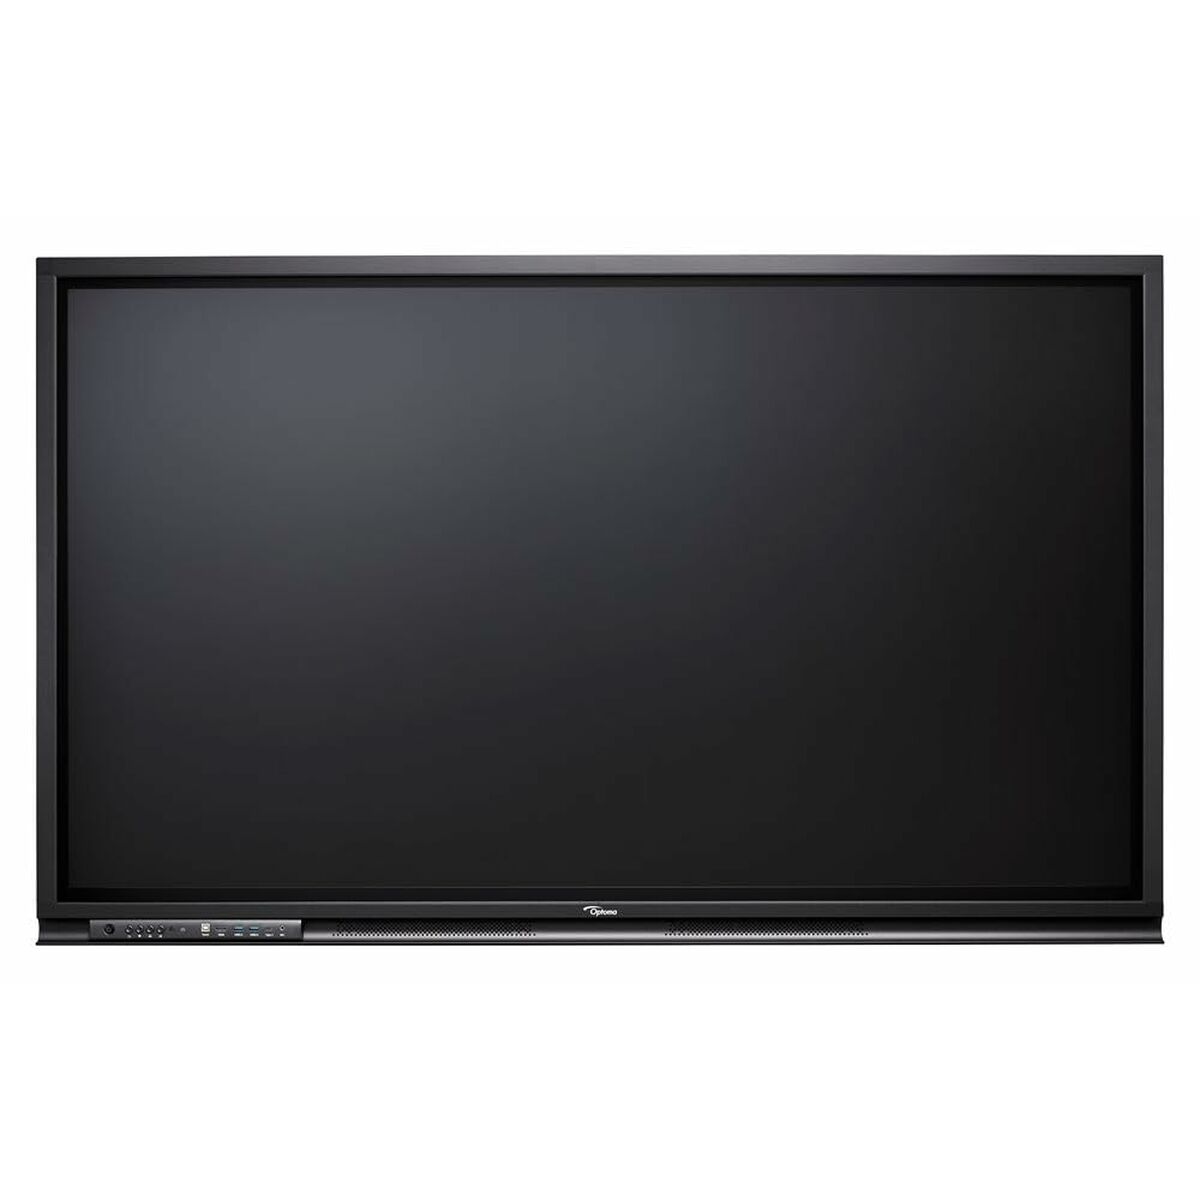 Interactive Touch Screen Optoma 3752RK 75" LED D-LED, Optoma, Computing, interactive-touch-screen-optoma-3752rk-75-led-d-led, :Ultra HD, Brand_Optoma, category-reference-2609, category-reference-2642, category-reference-2644, category-reference-t-19685, category-reference-t-19902, computers / peripherals, Condition_NEW, office, Price_+ 1000, Teleworking, RiotNook